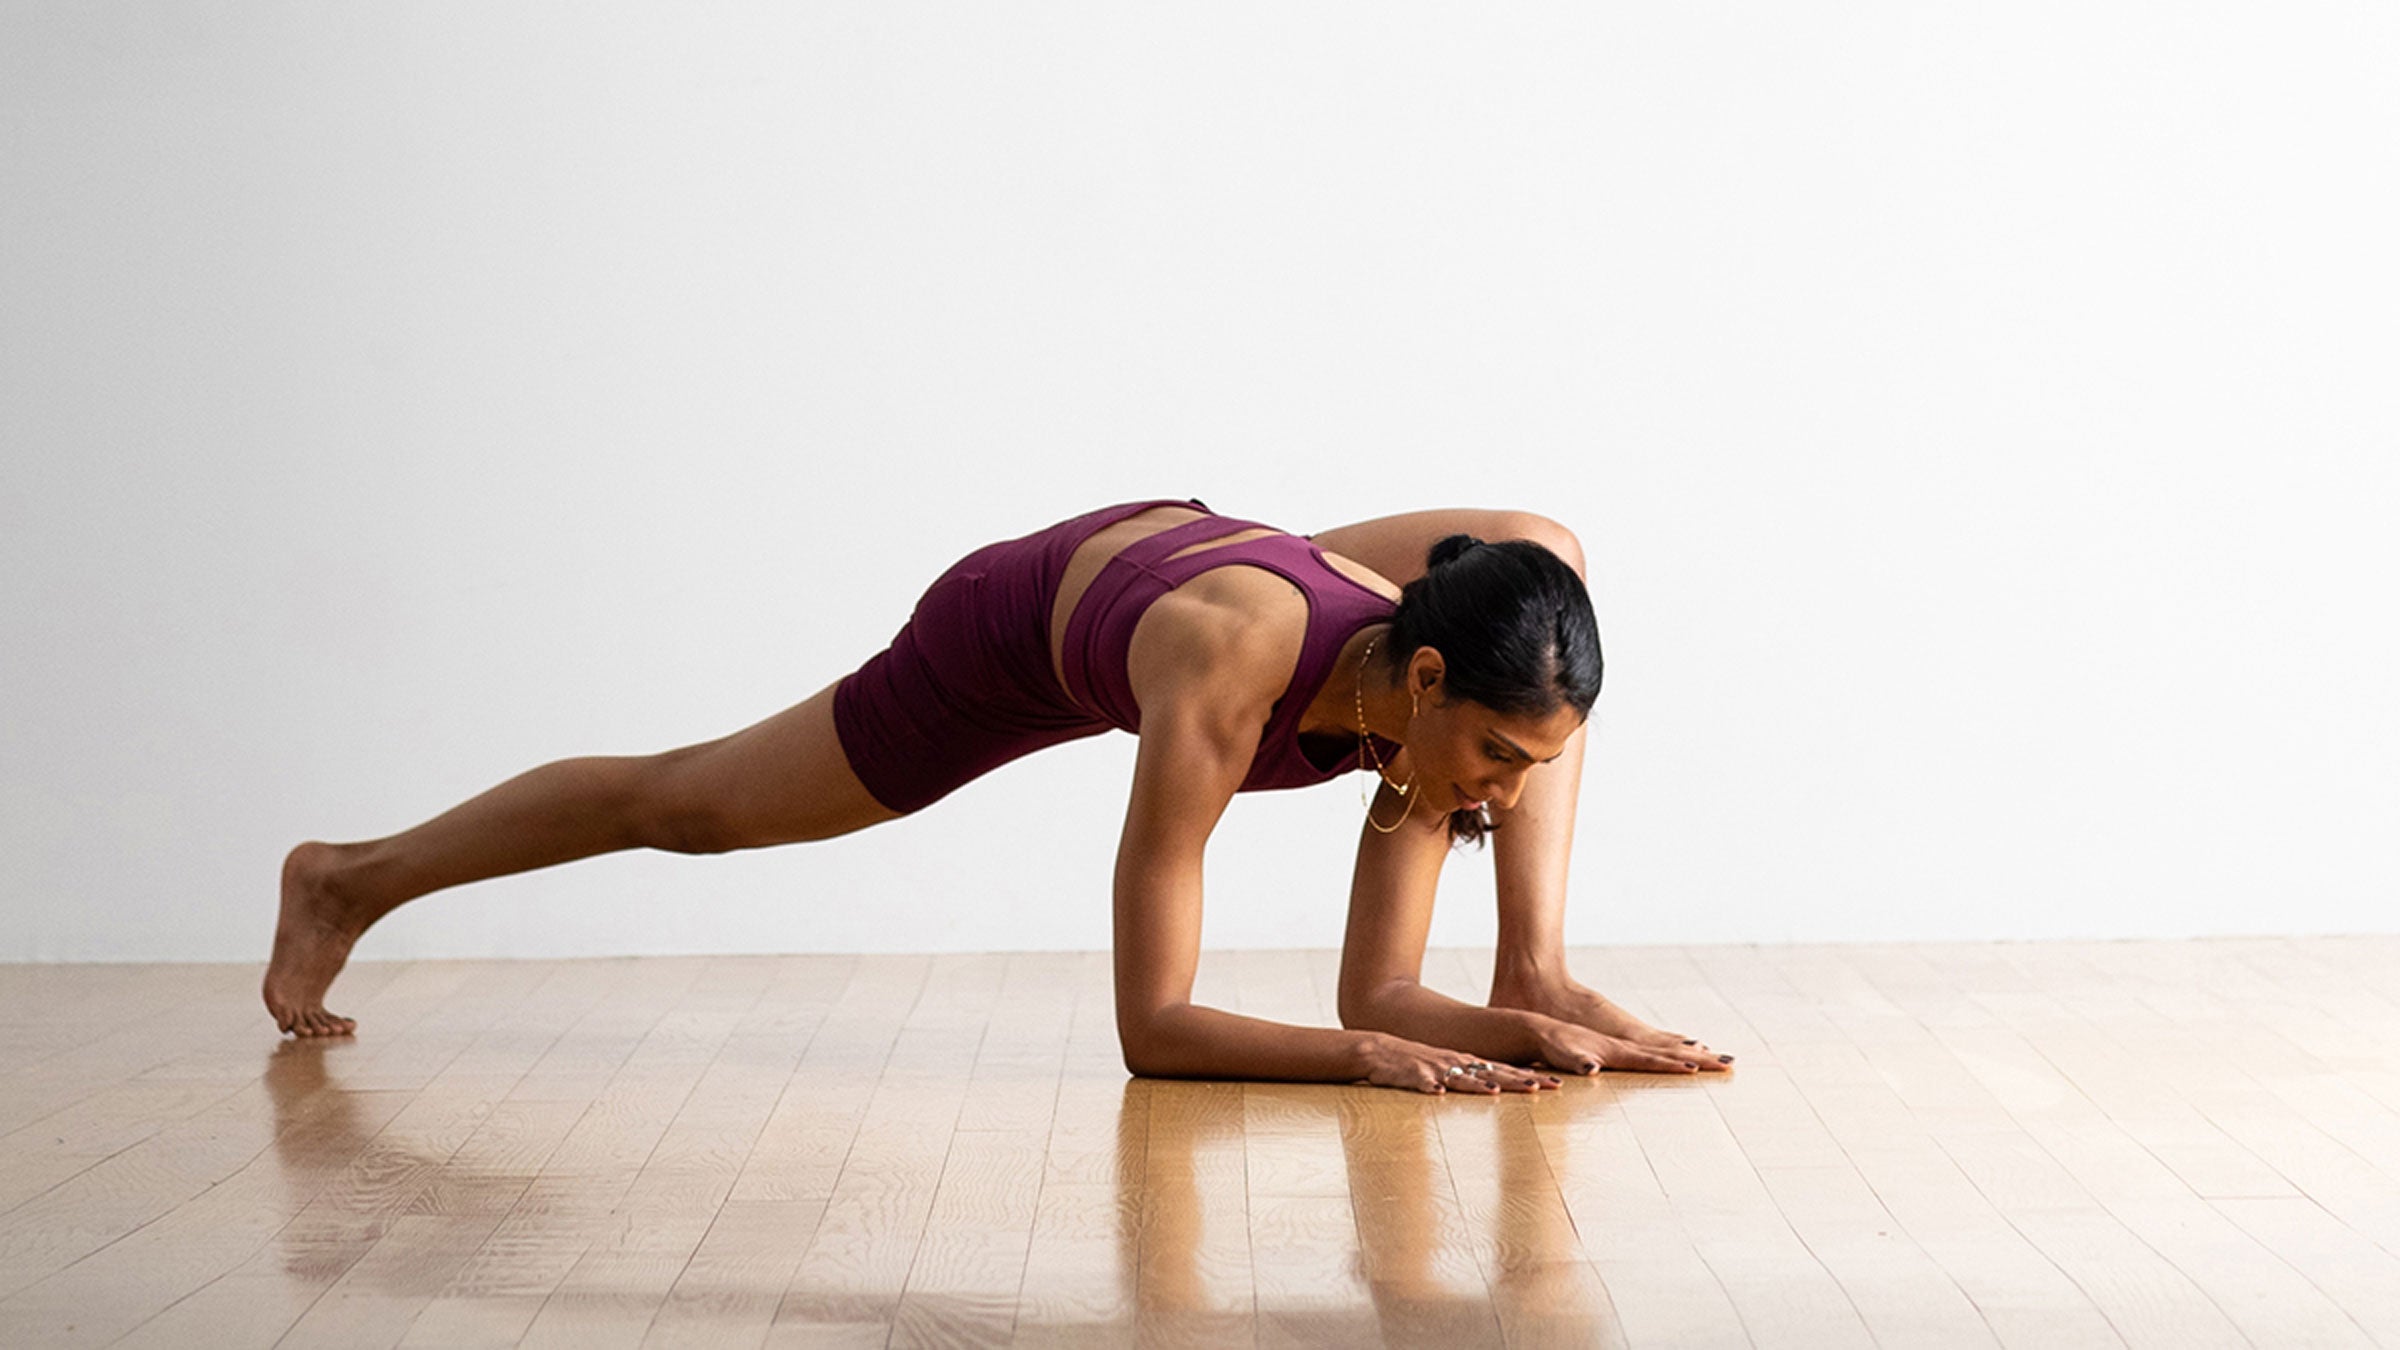 6 Hip Flexor Stretches to Loosen Tight Muscles - Yoga Journal